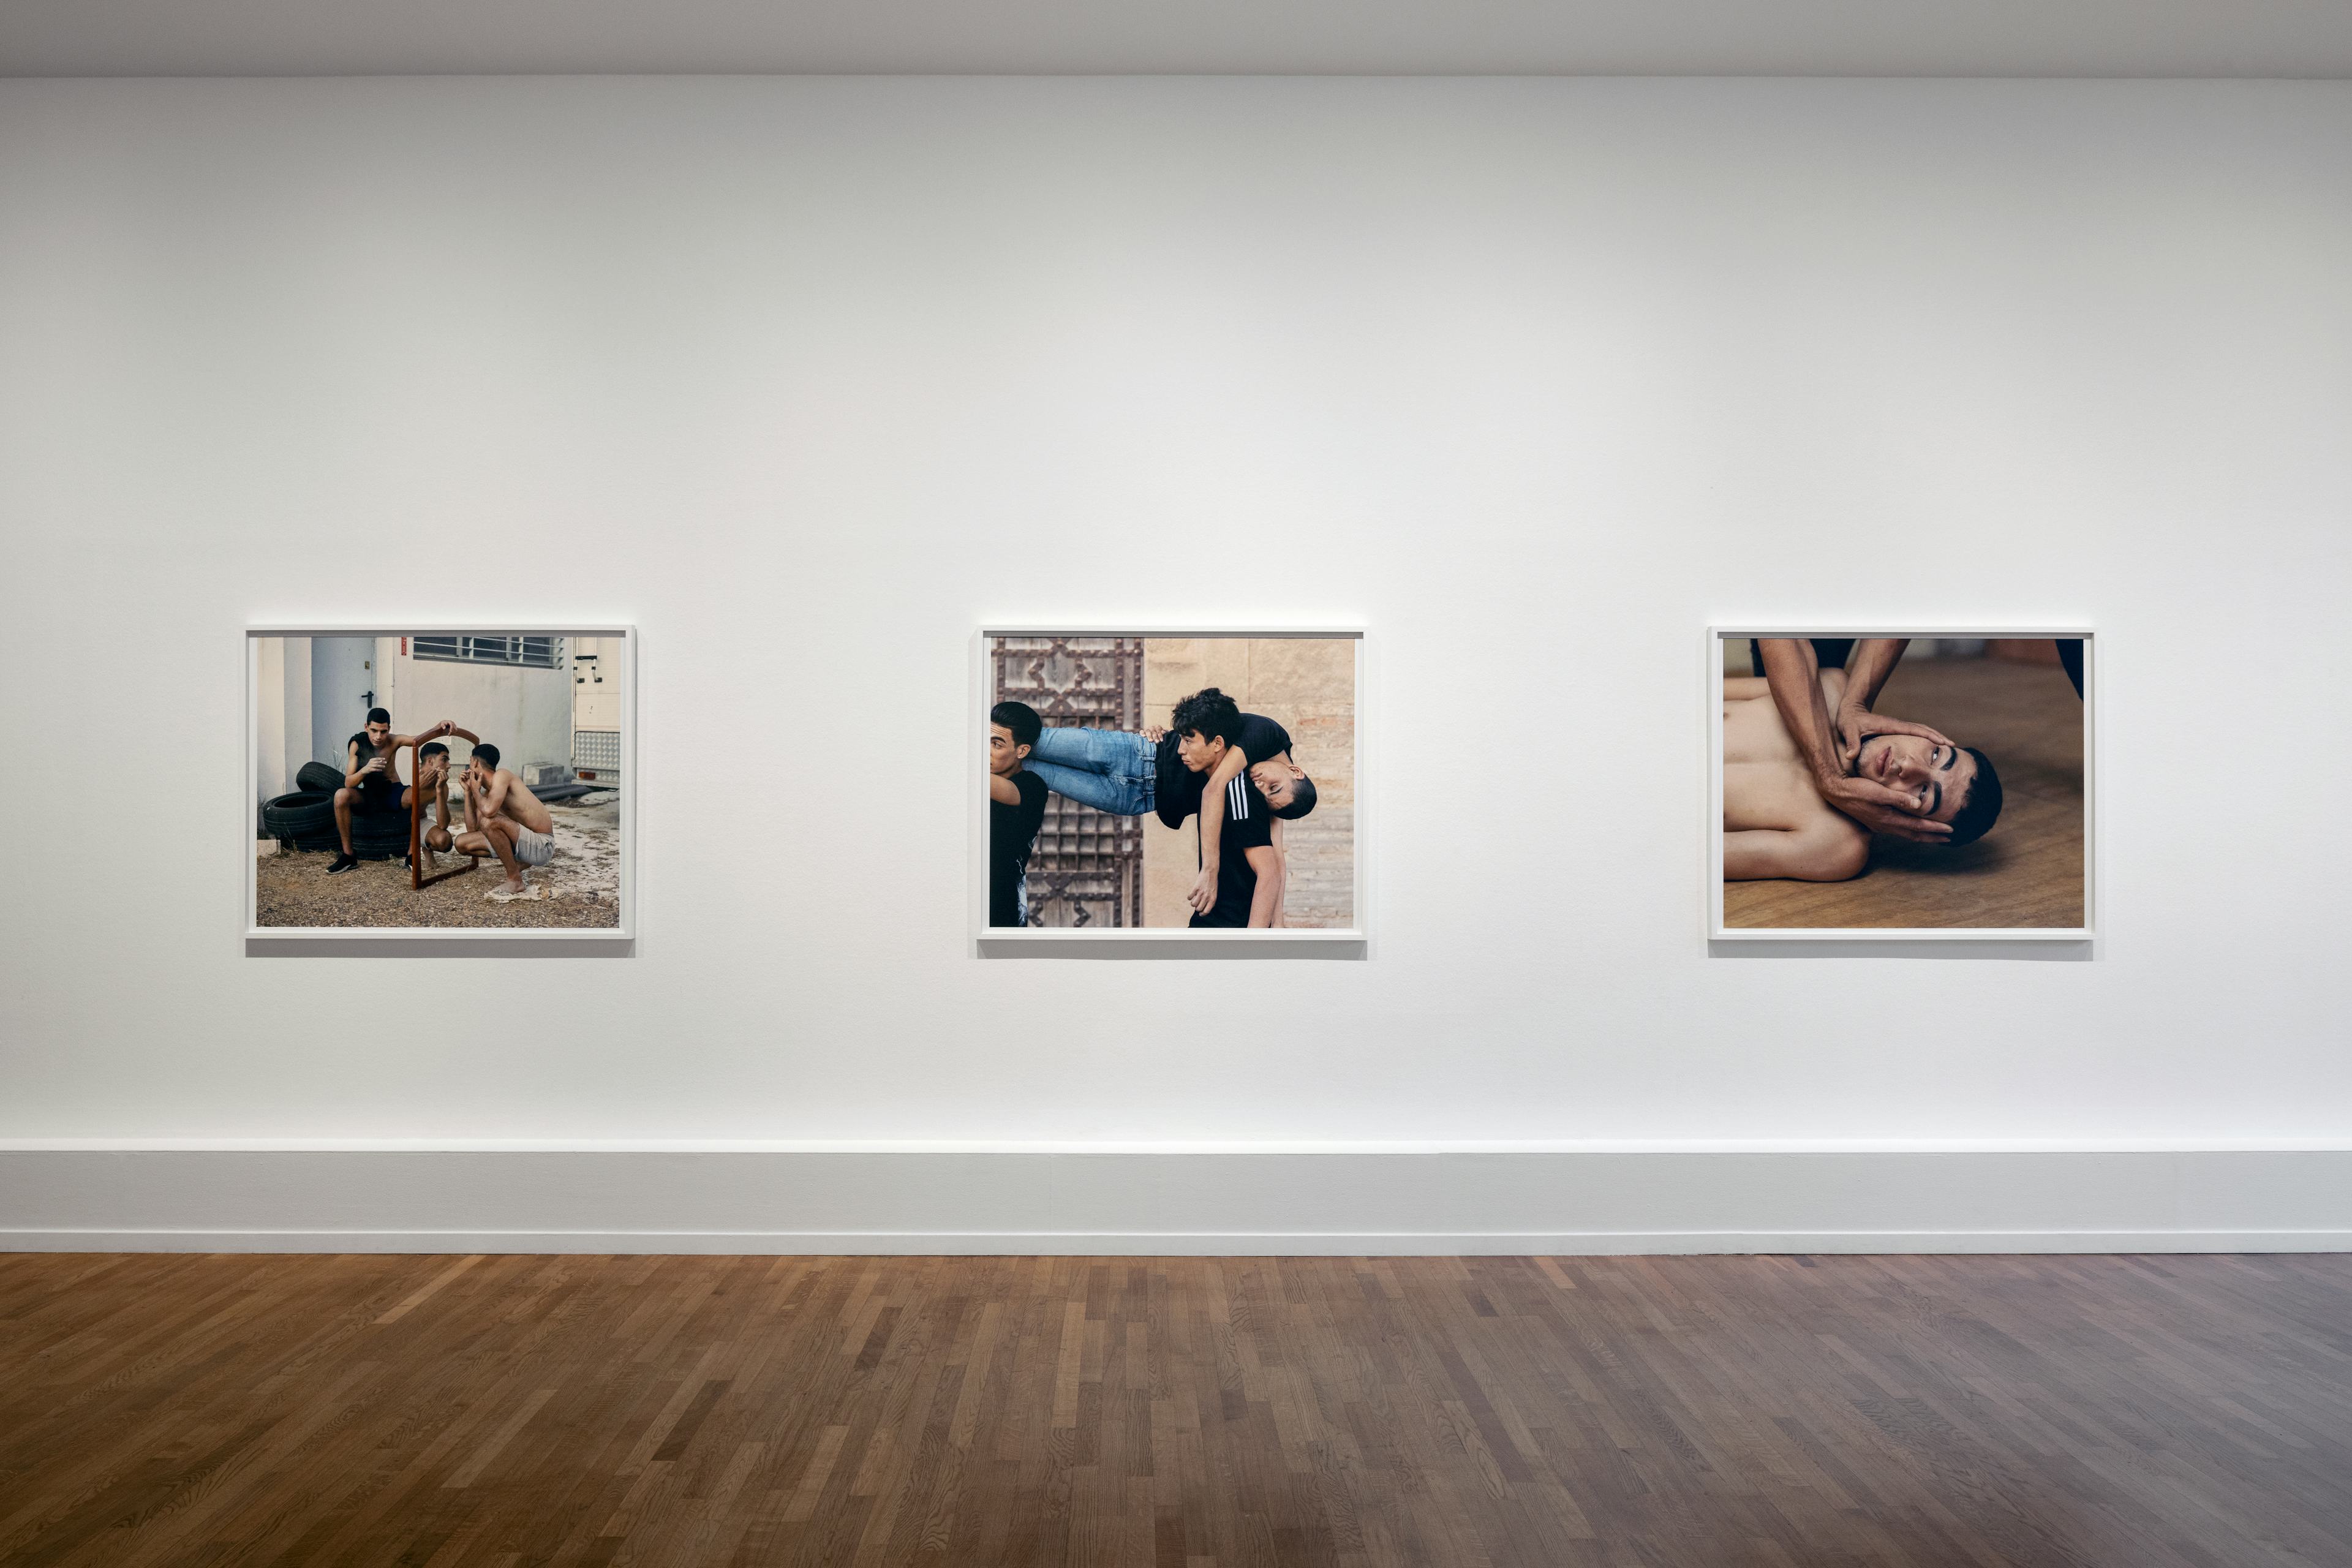 Image of photos hanging in a white exhibition space